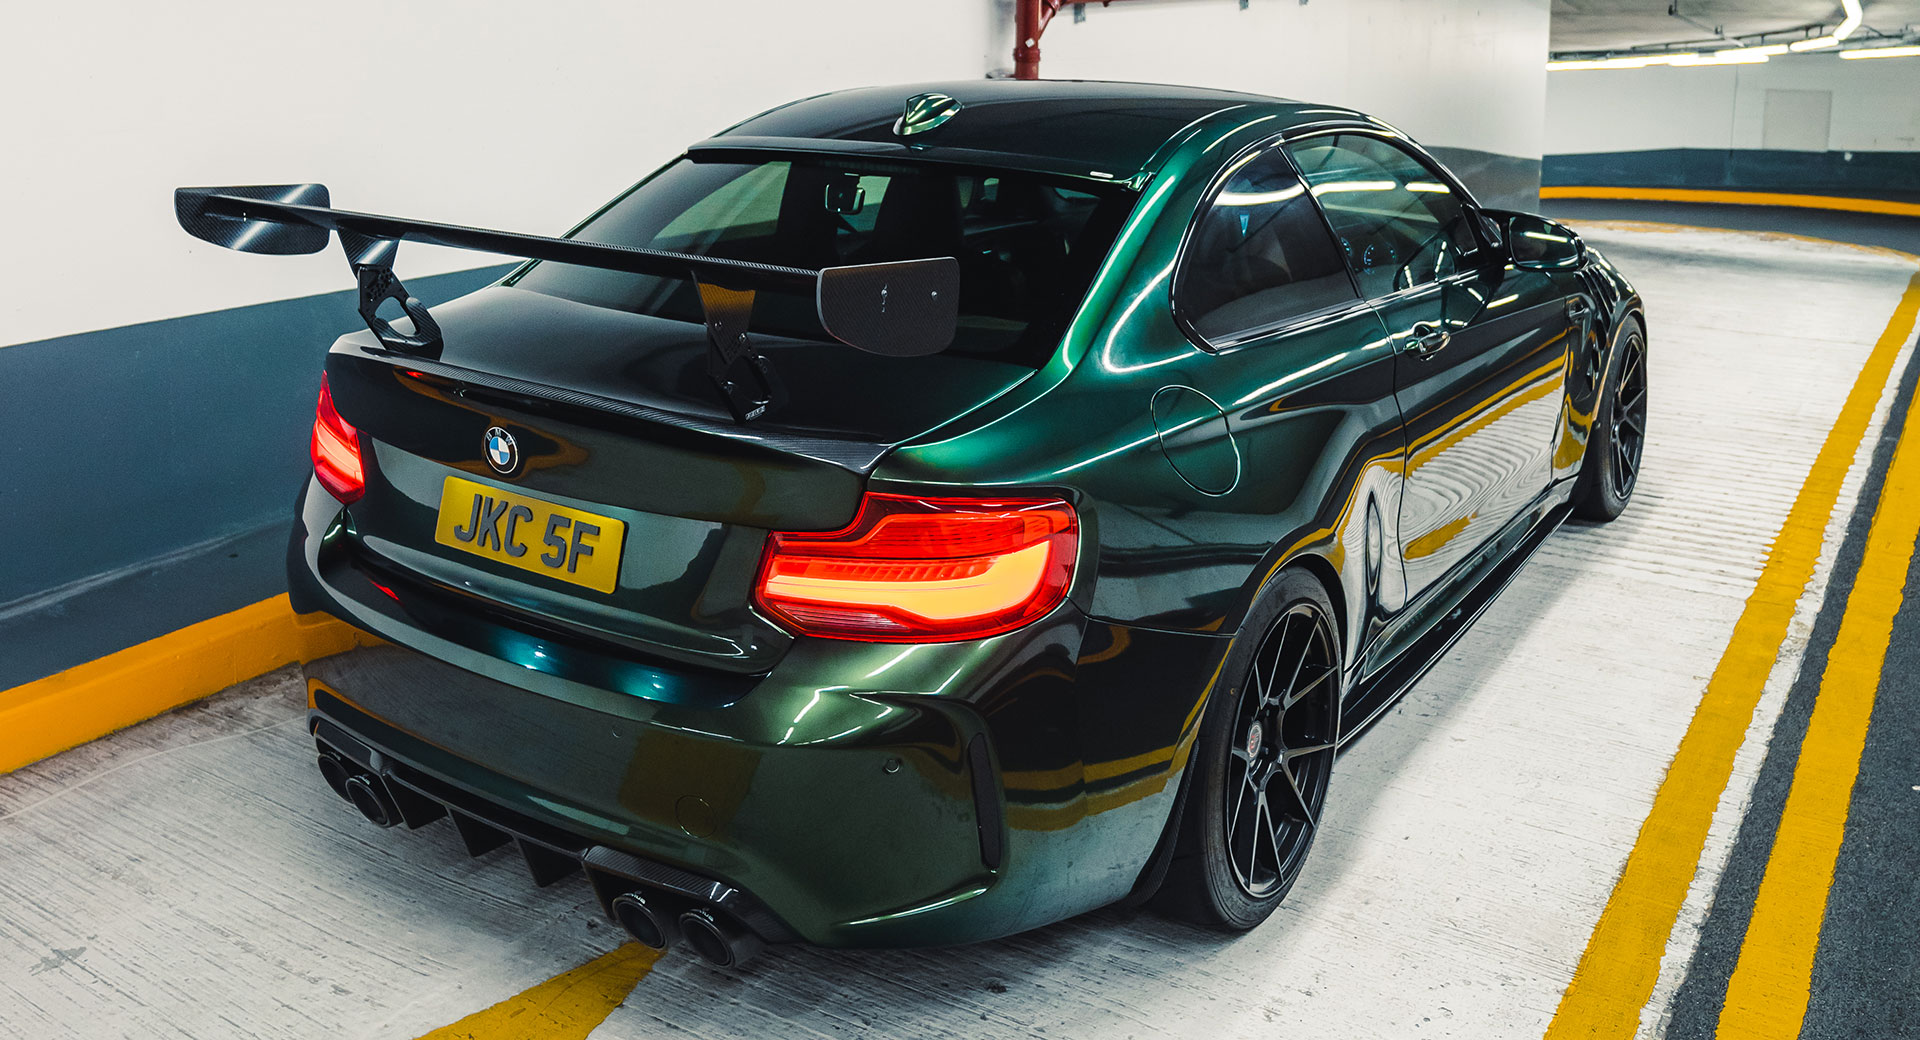 Have you seen the BMW M2?